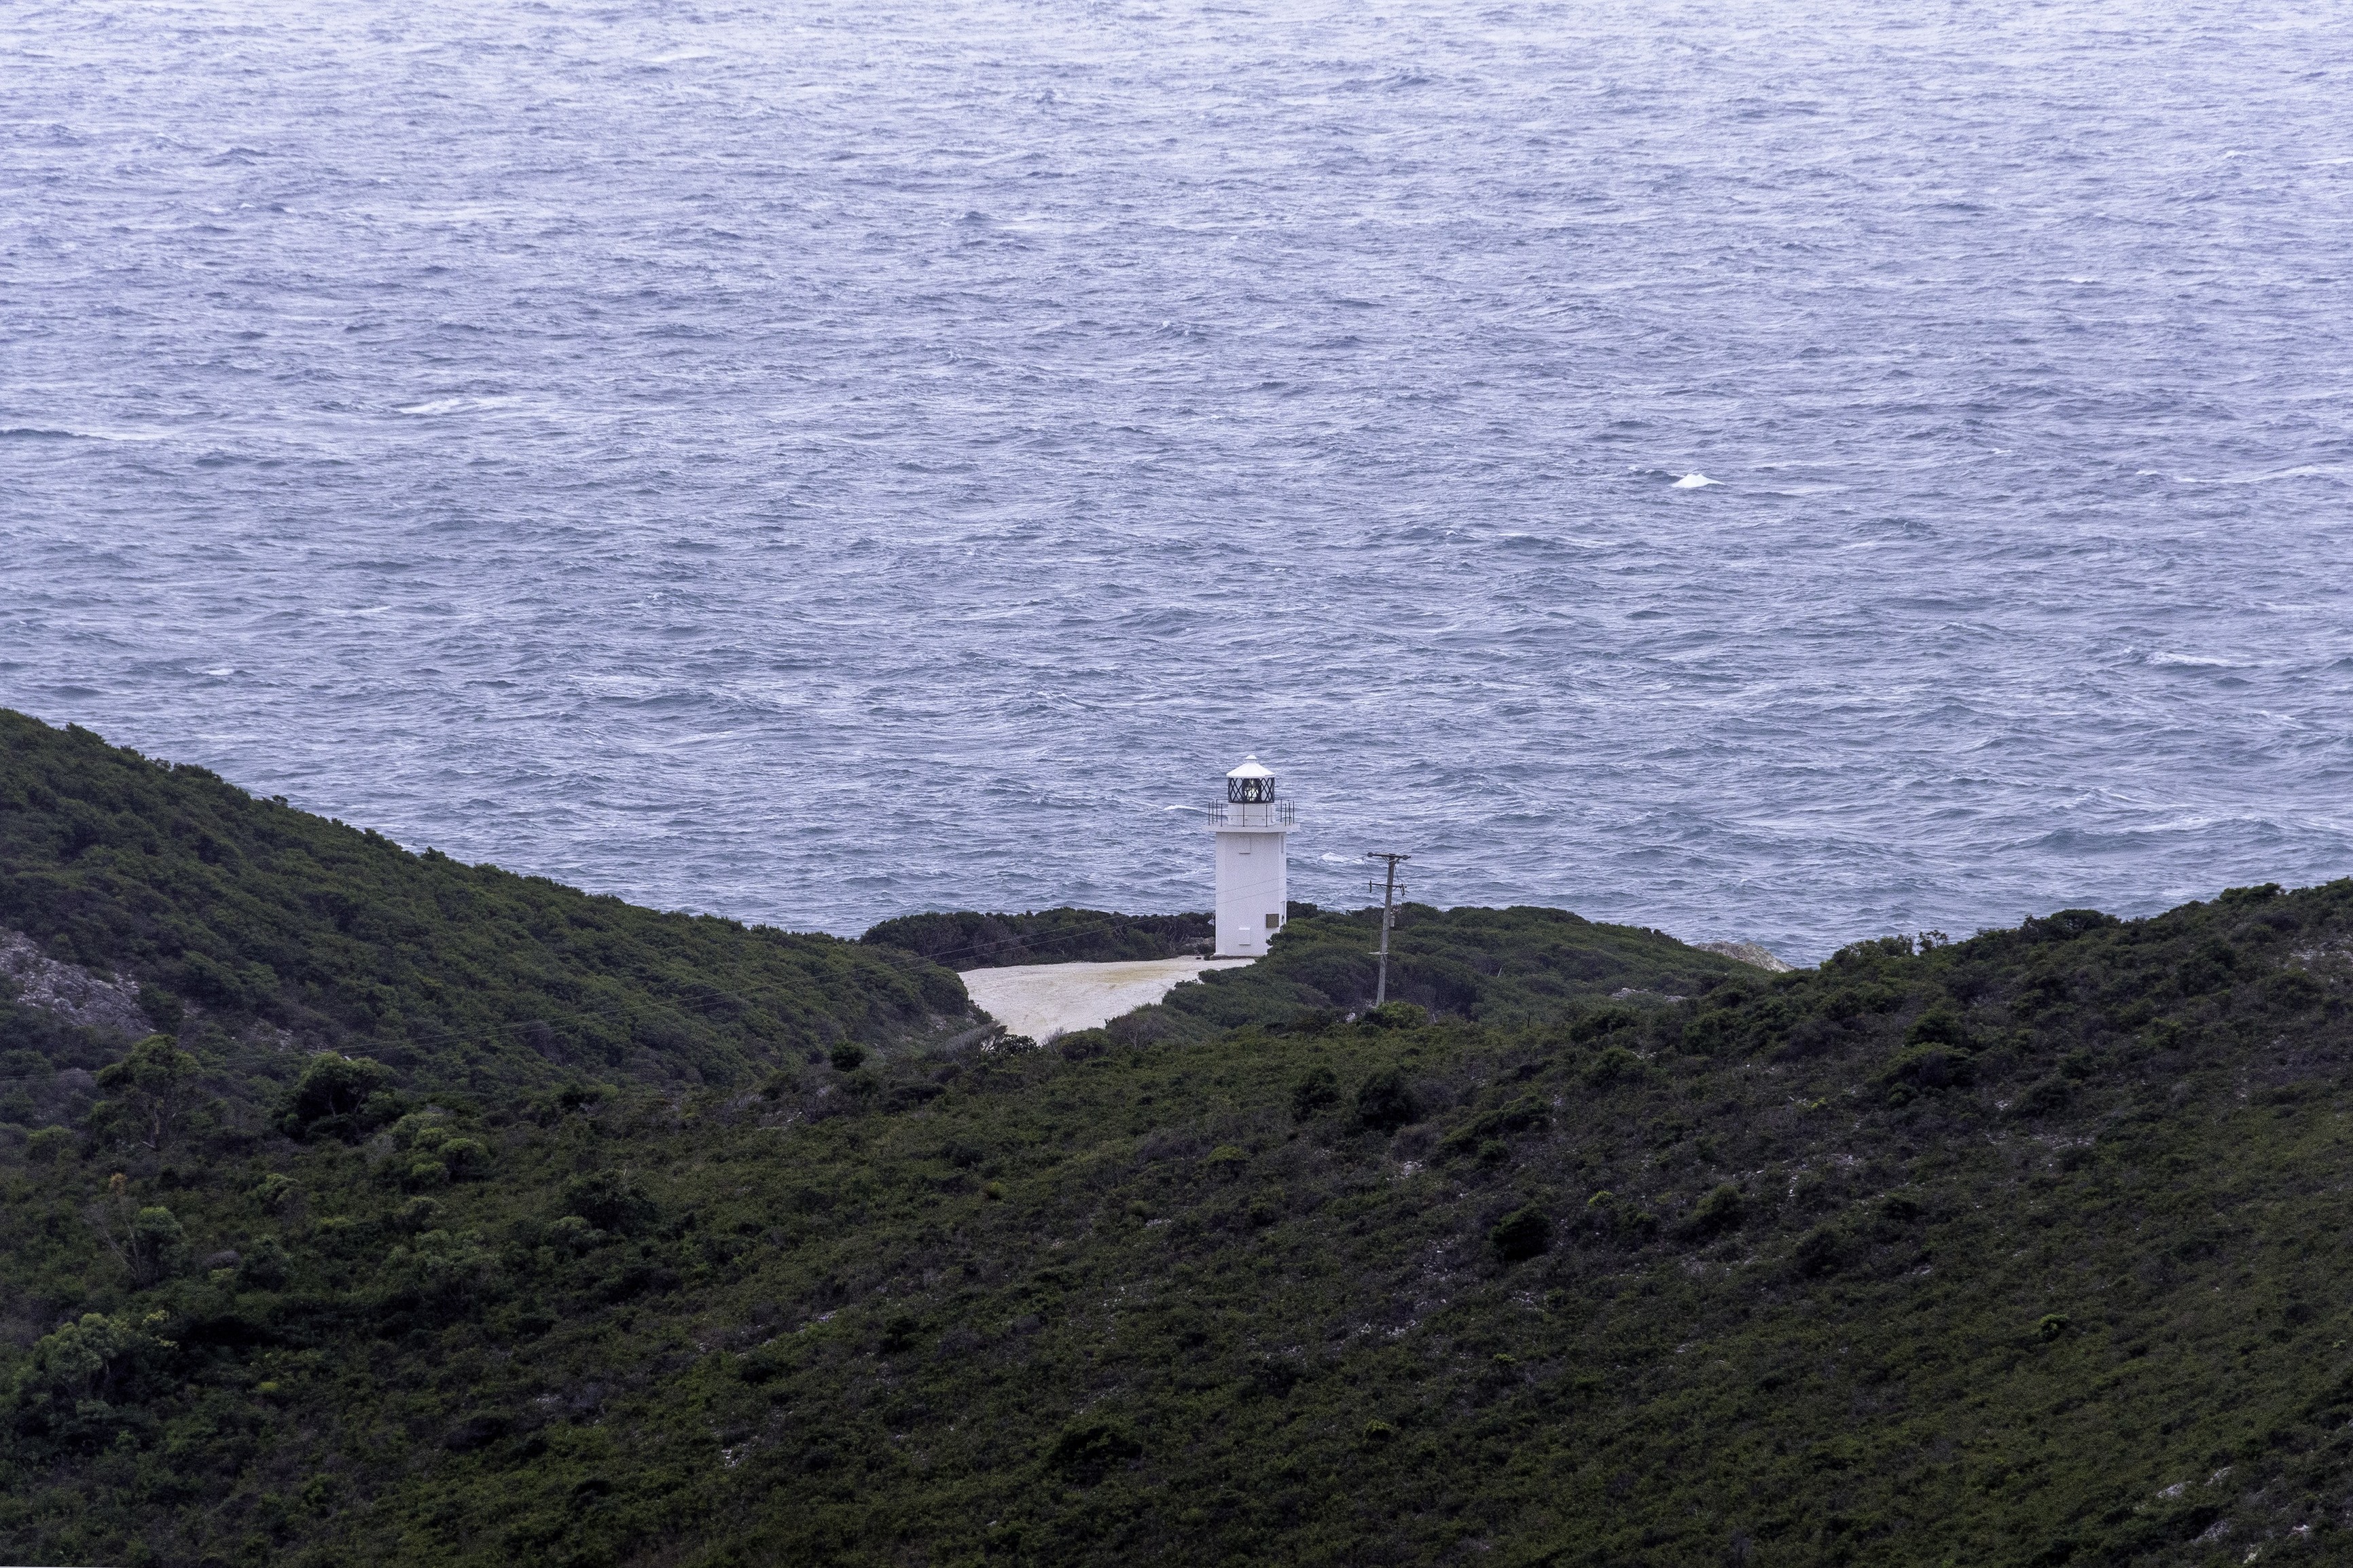 "Image of the Rocky Cape Lighthouse in the distance with large, rocky hills fill the foreground, on an overcast day. "